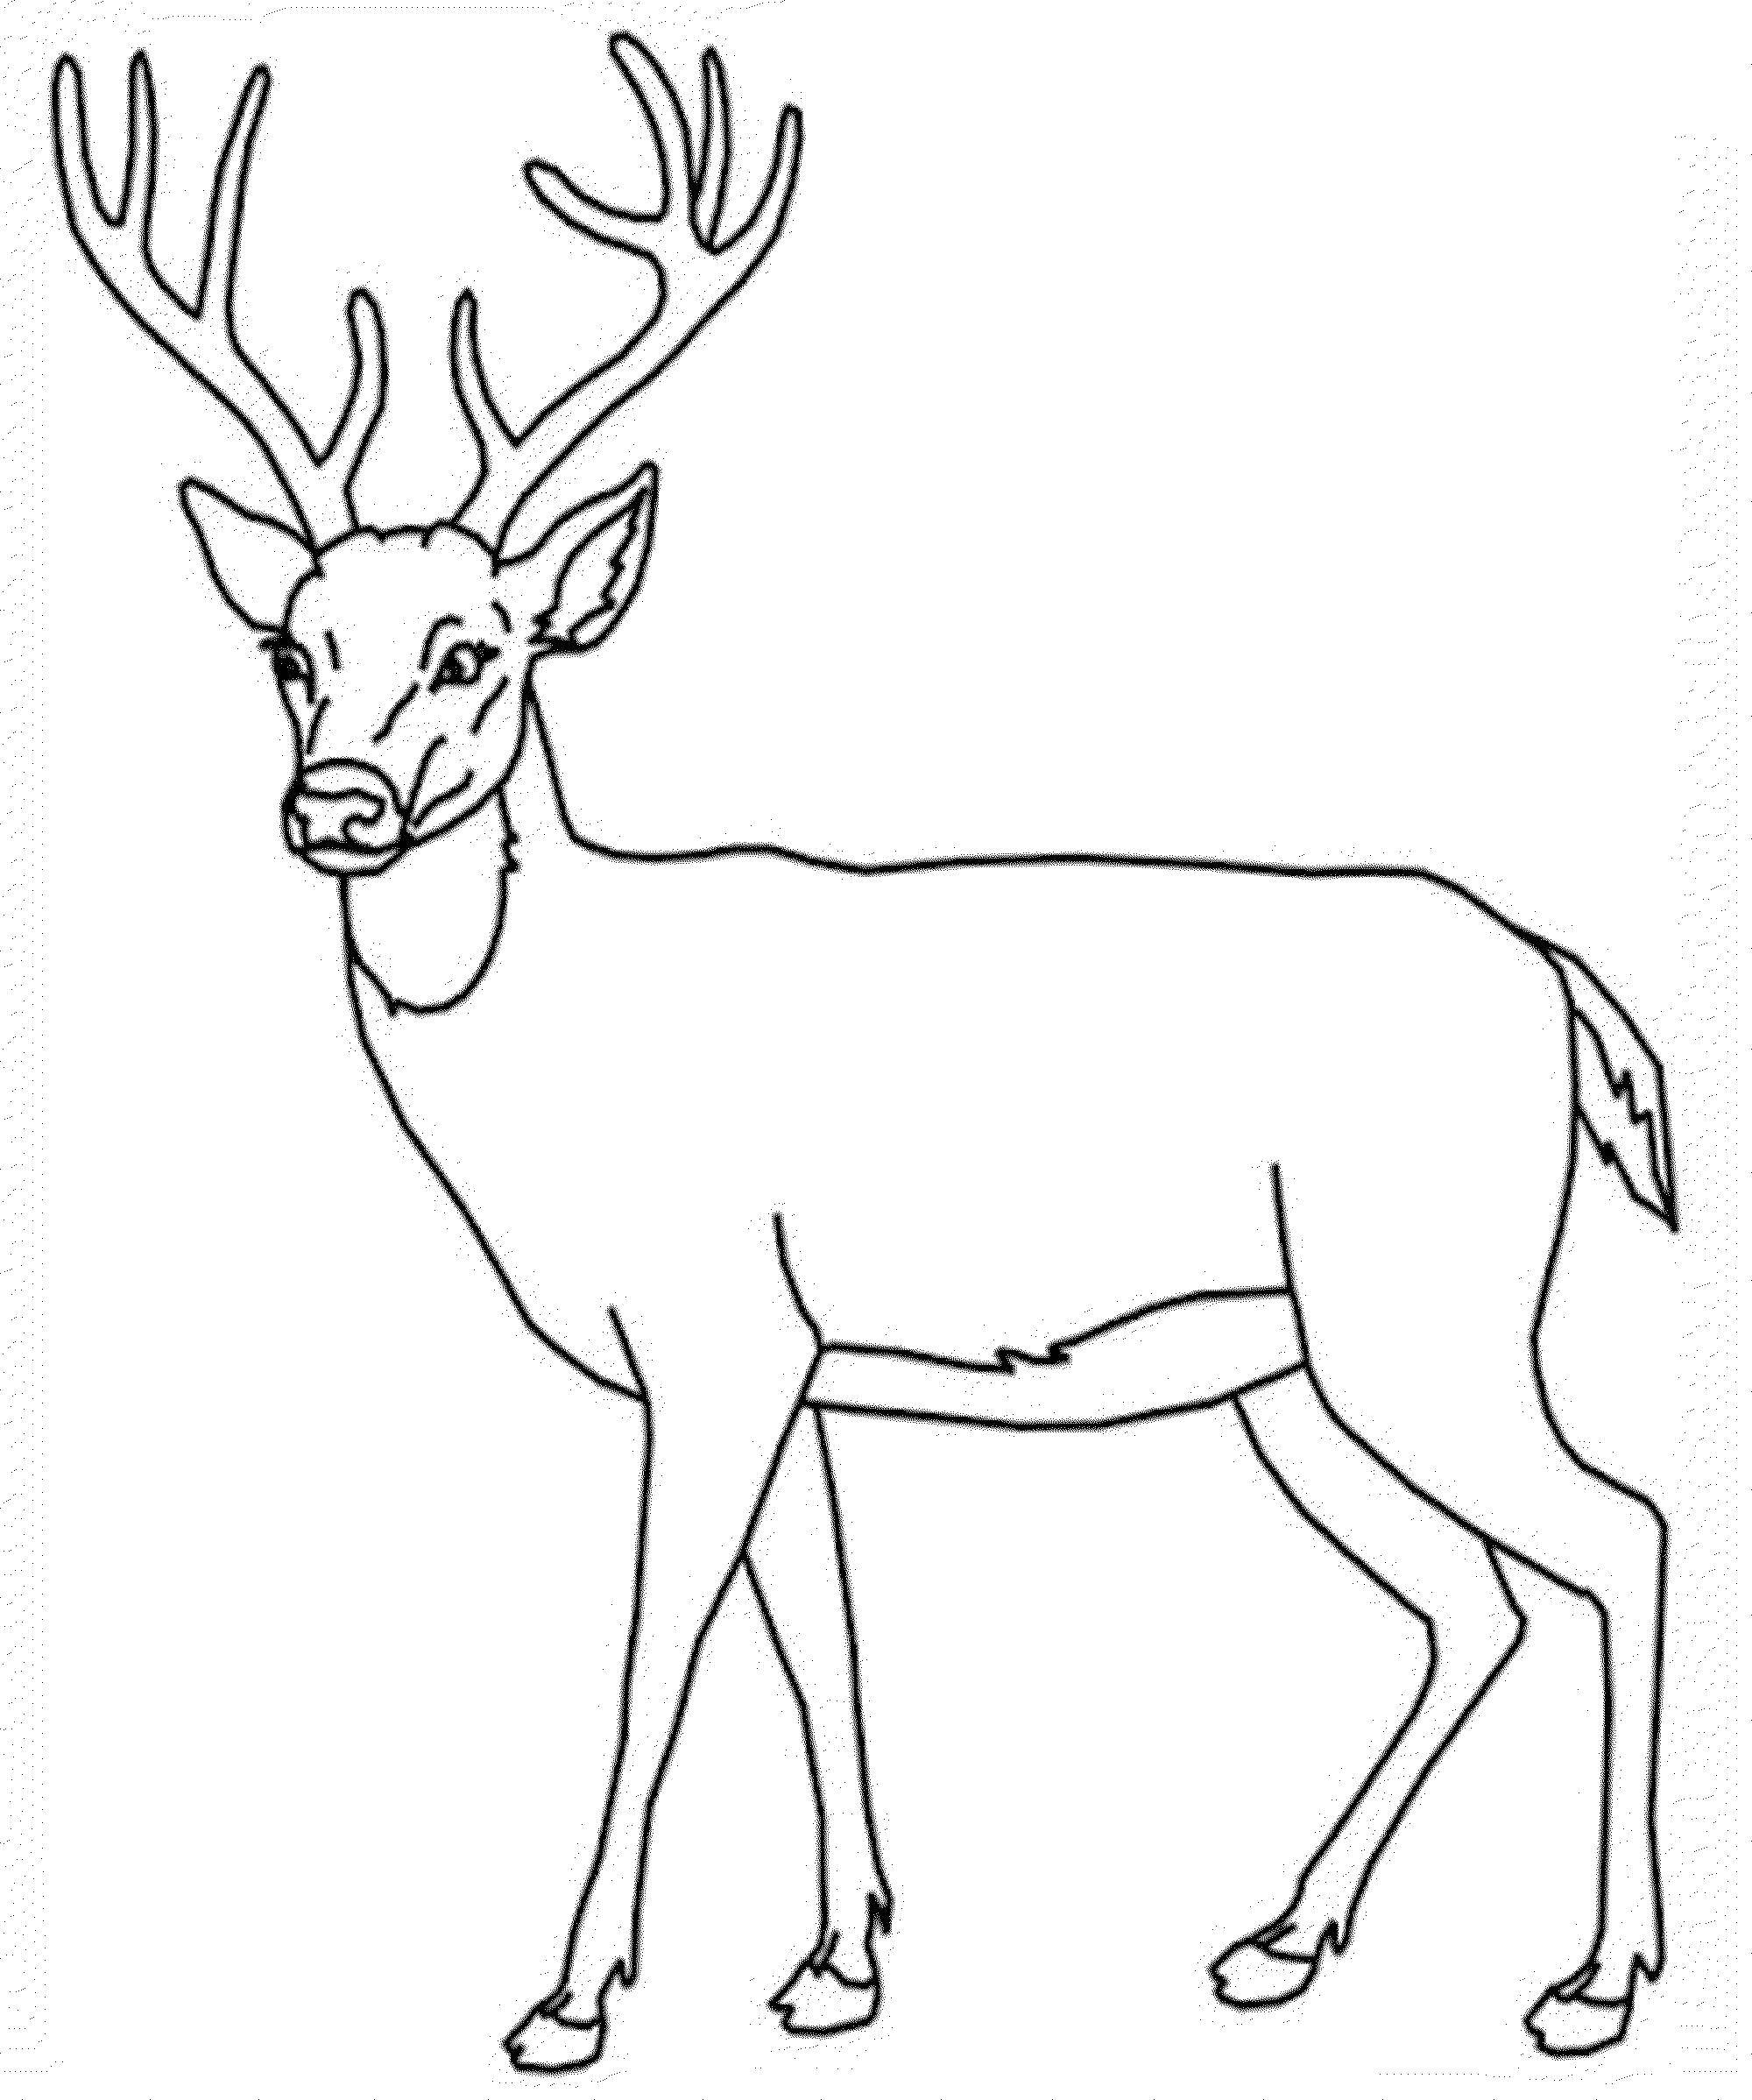 Coloring Fawn. Category Animals. Tags:  animals, deer, horns.